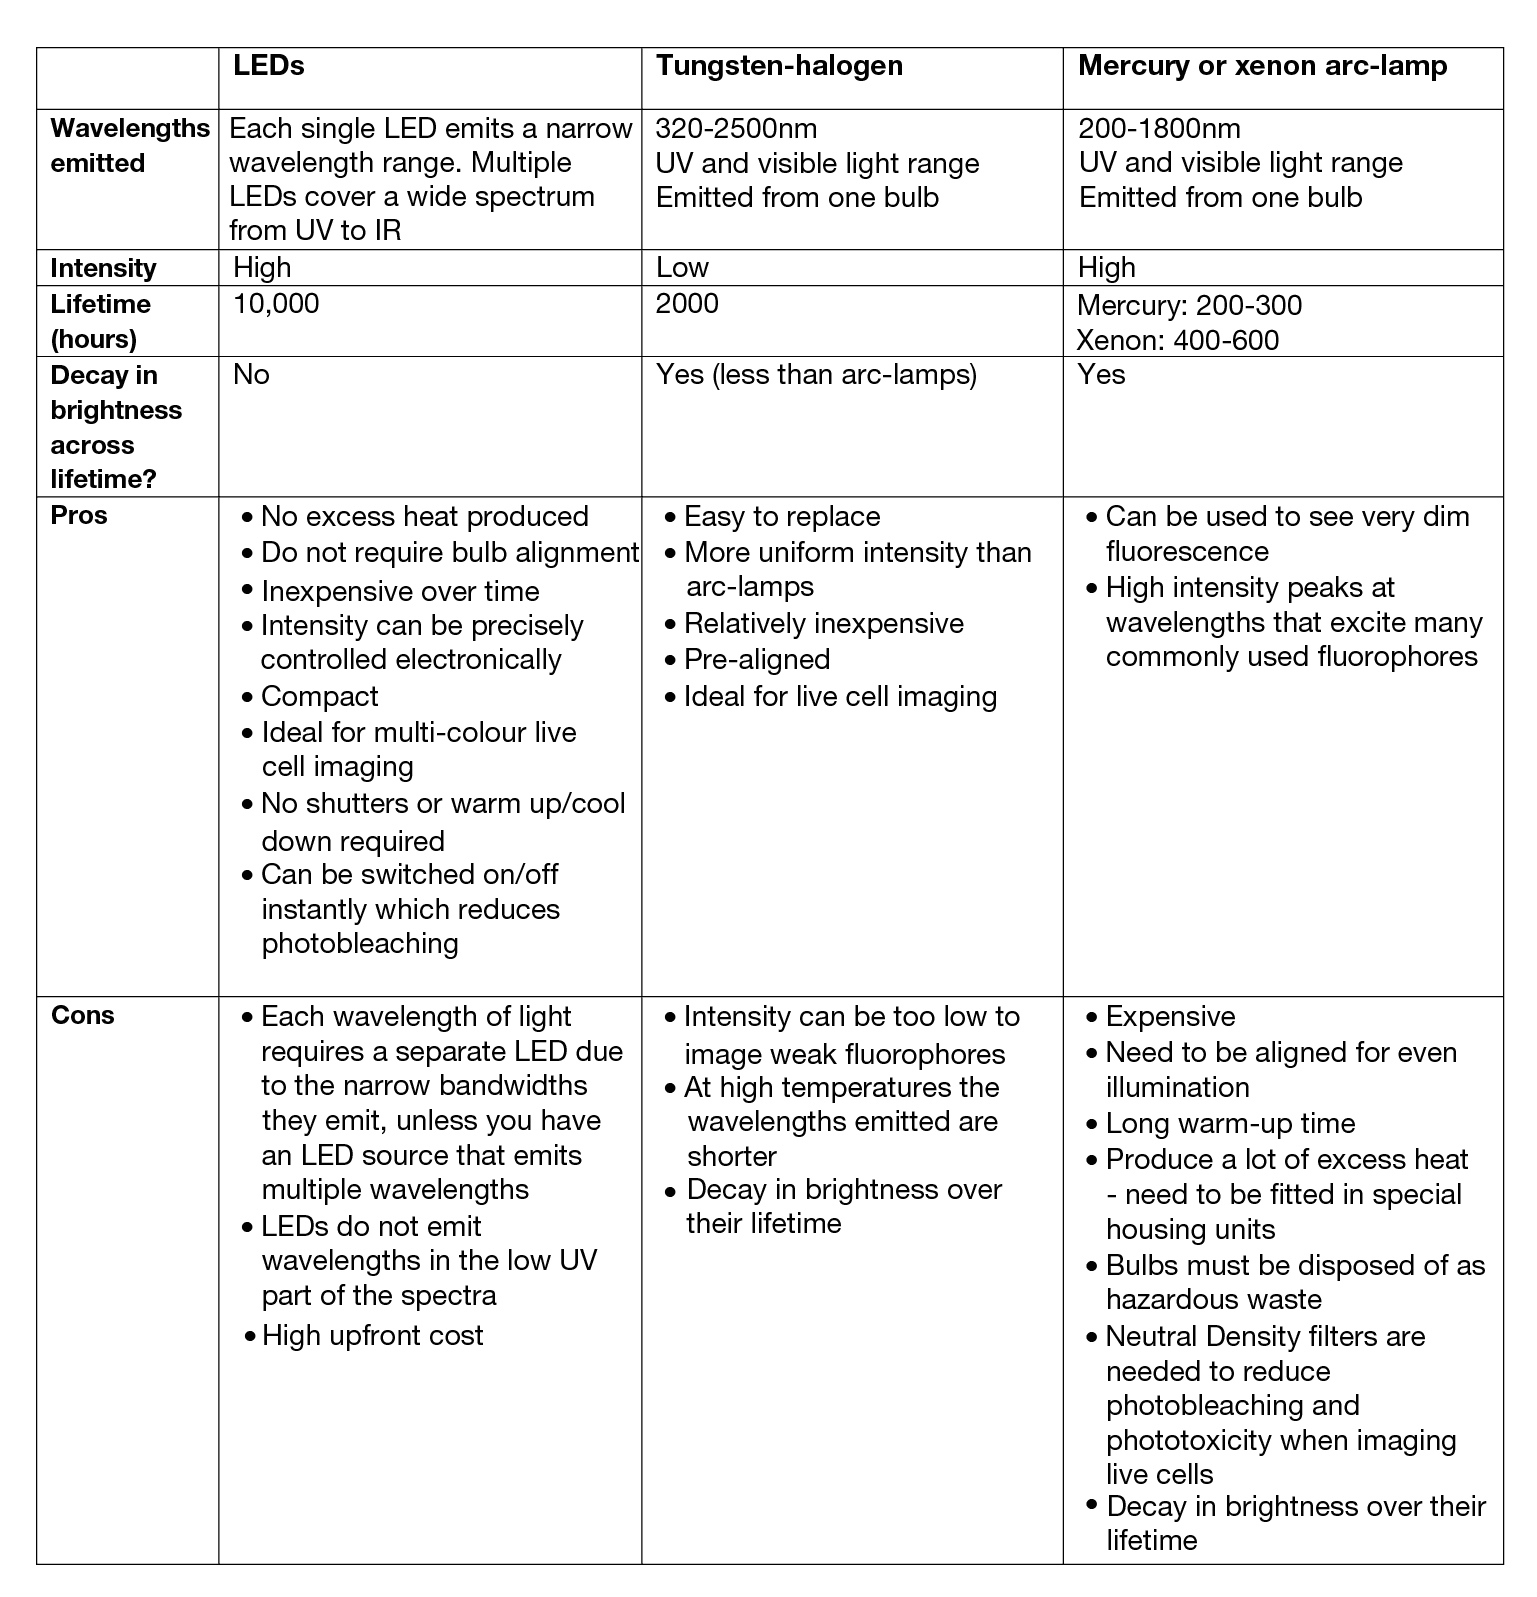 A table comparing the different light sources available for fluorescence microscopy